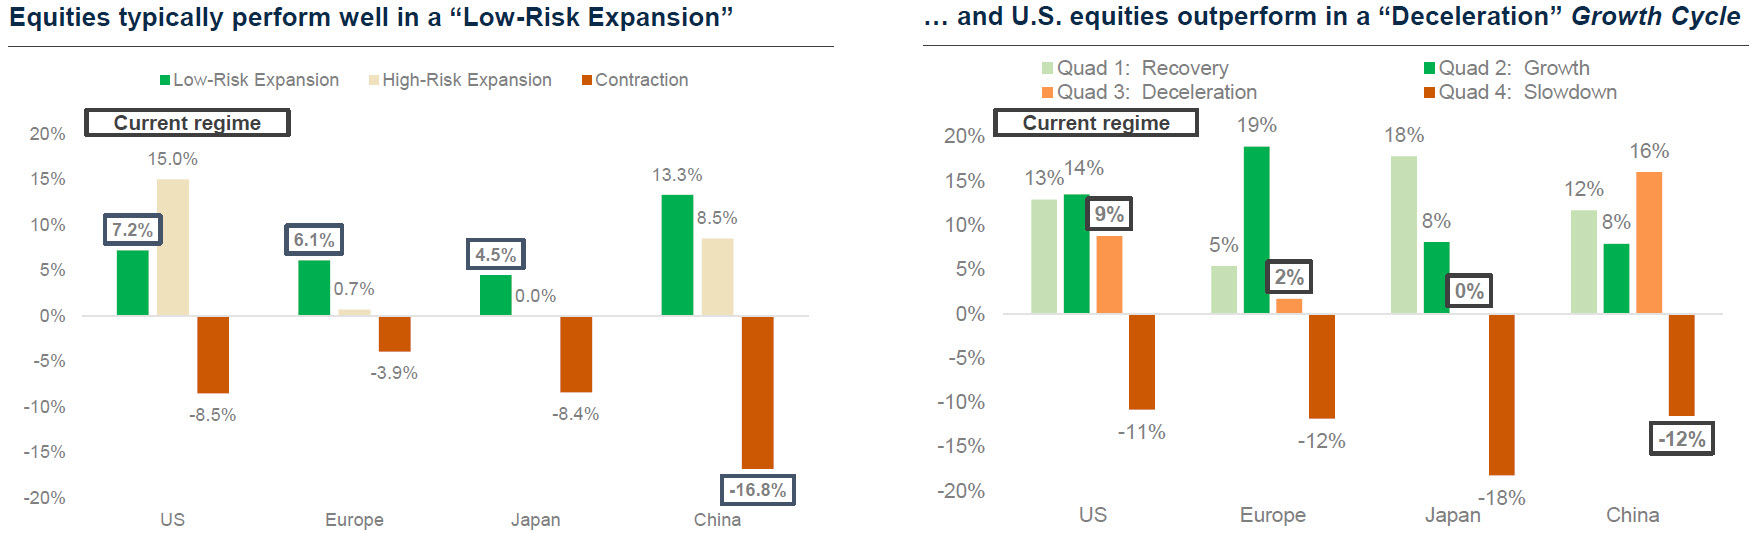 equities_typically_perform_well_in_a_low-risk_expansion.jpg